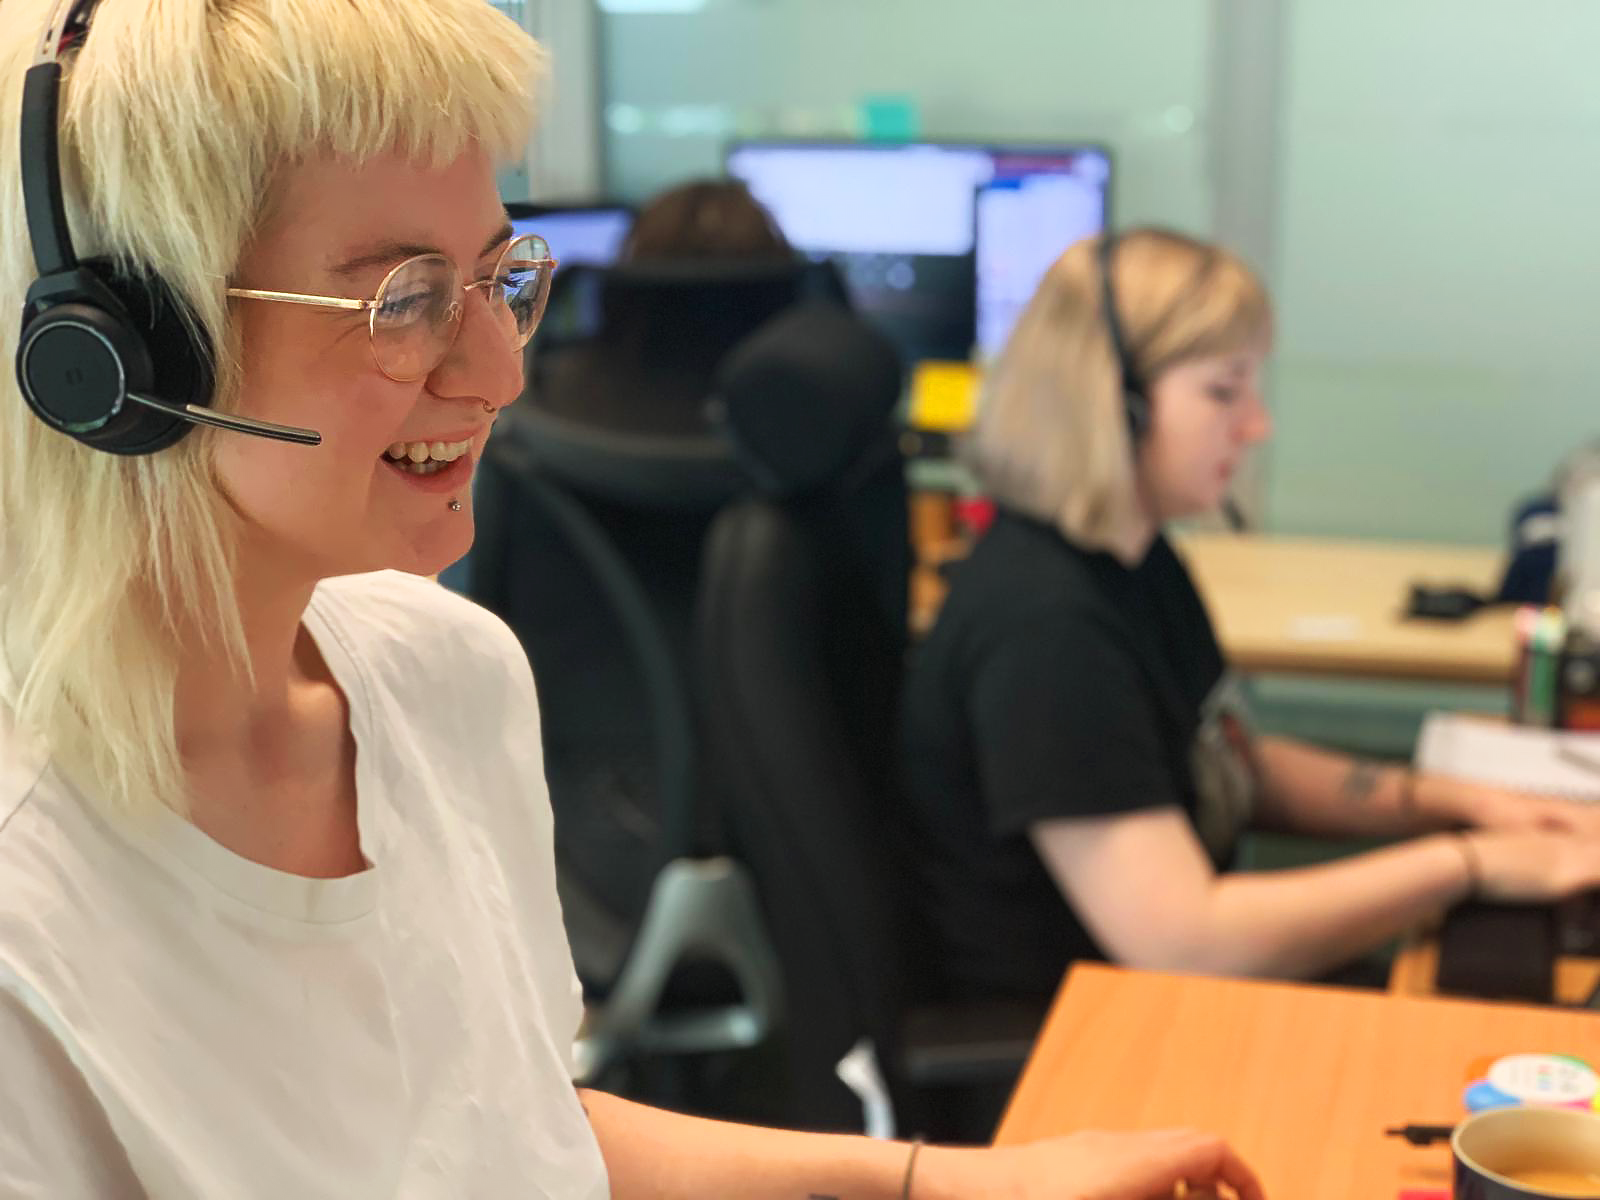 A white person in an office is using a noise cancelling headset and microphone, smiling at their computer.